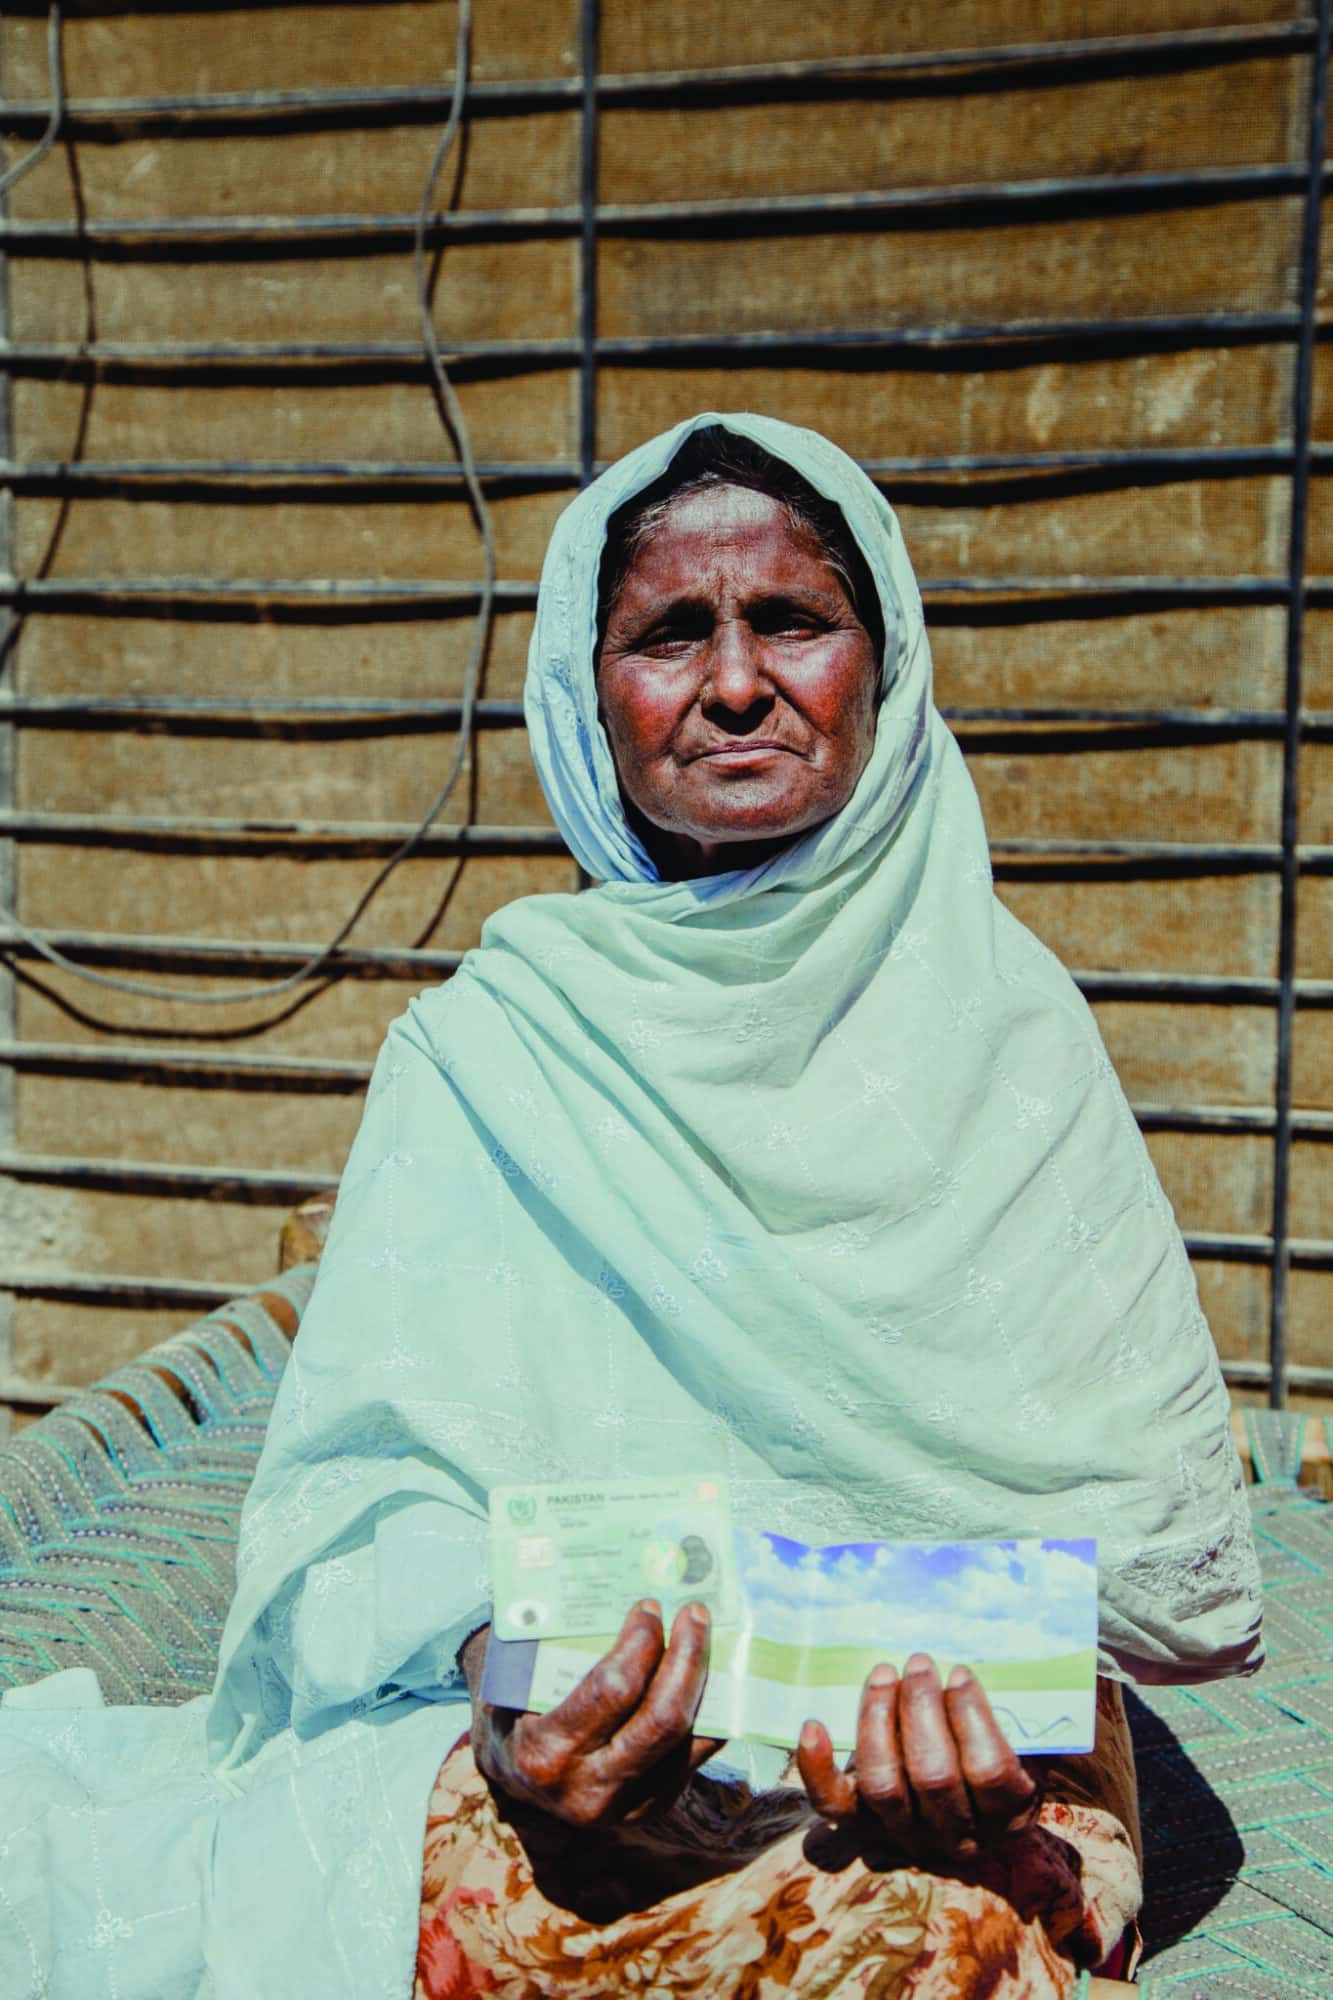 Kausar Parveen tells MDF in a inclusive interview how her new dairy business gives her financial freedom and her involvement in family decisions makes her feel strong.